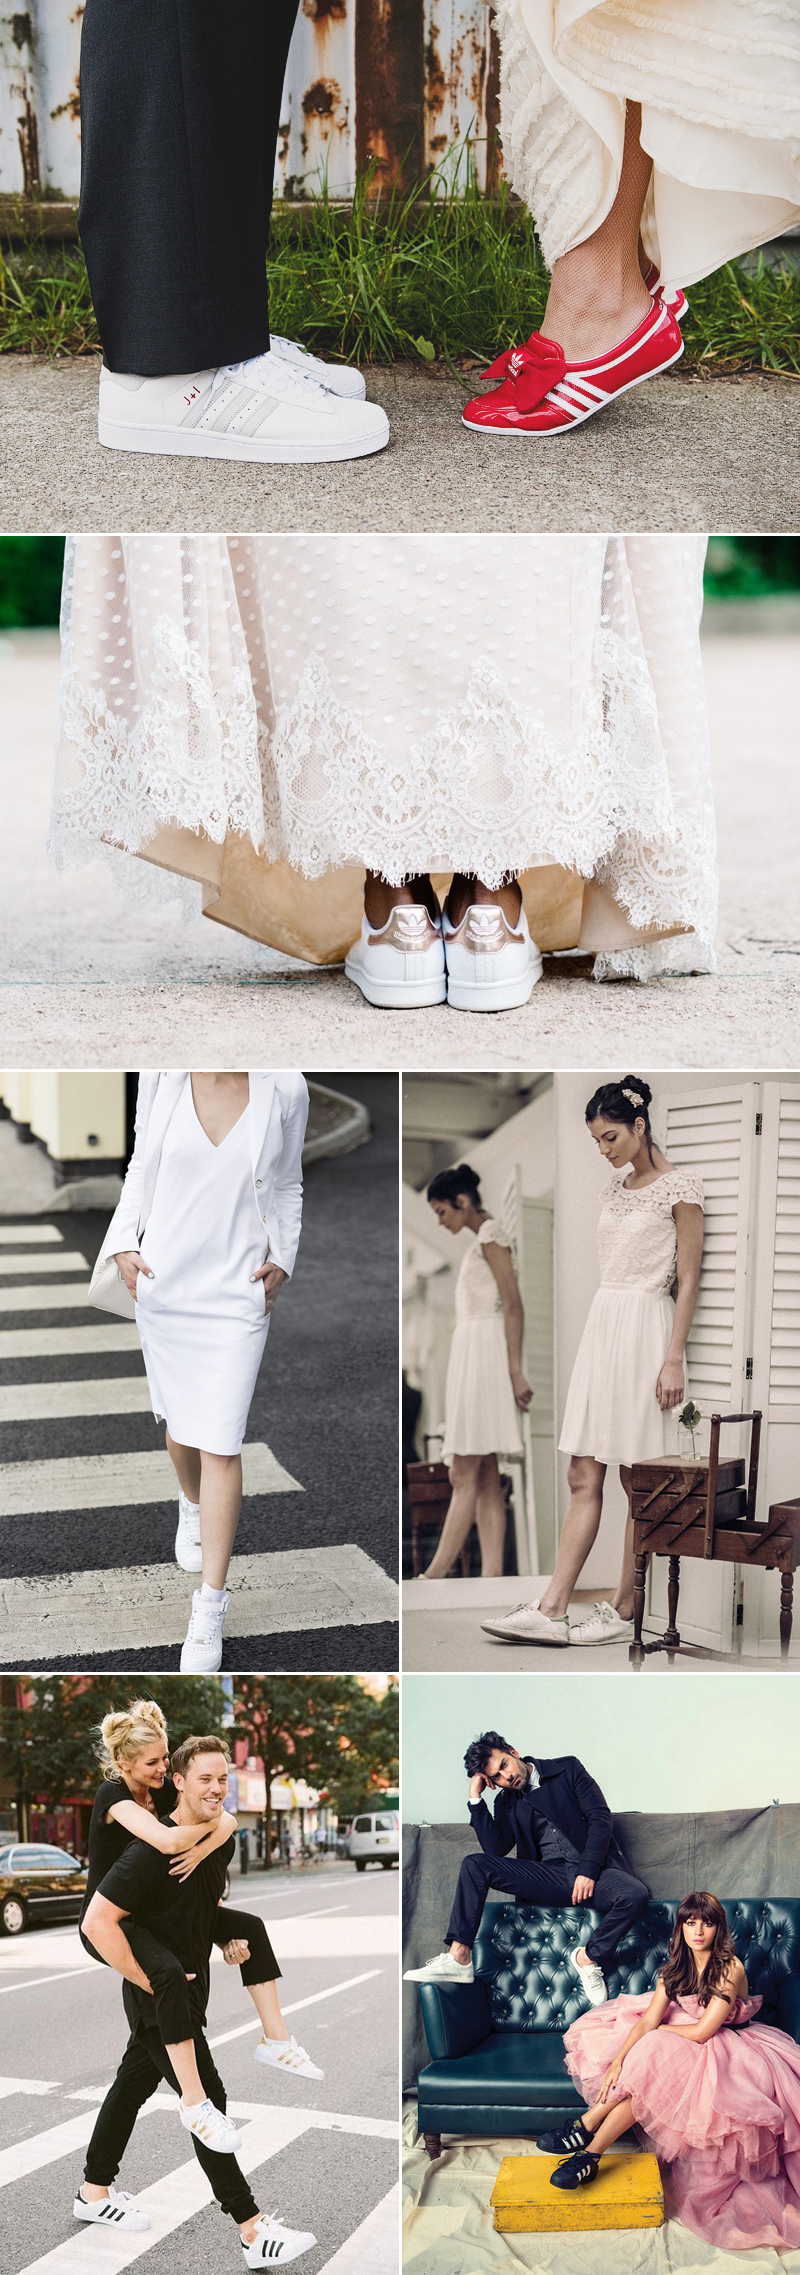 wedding dress and sneakers